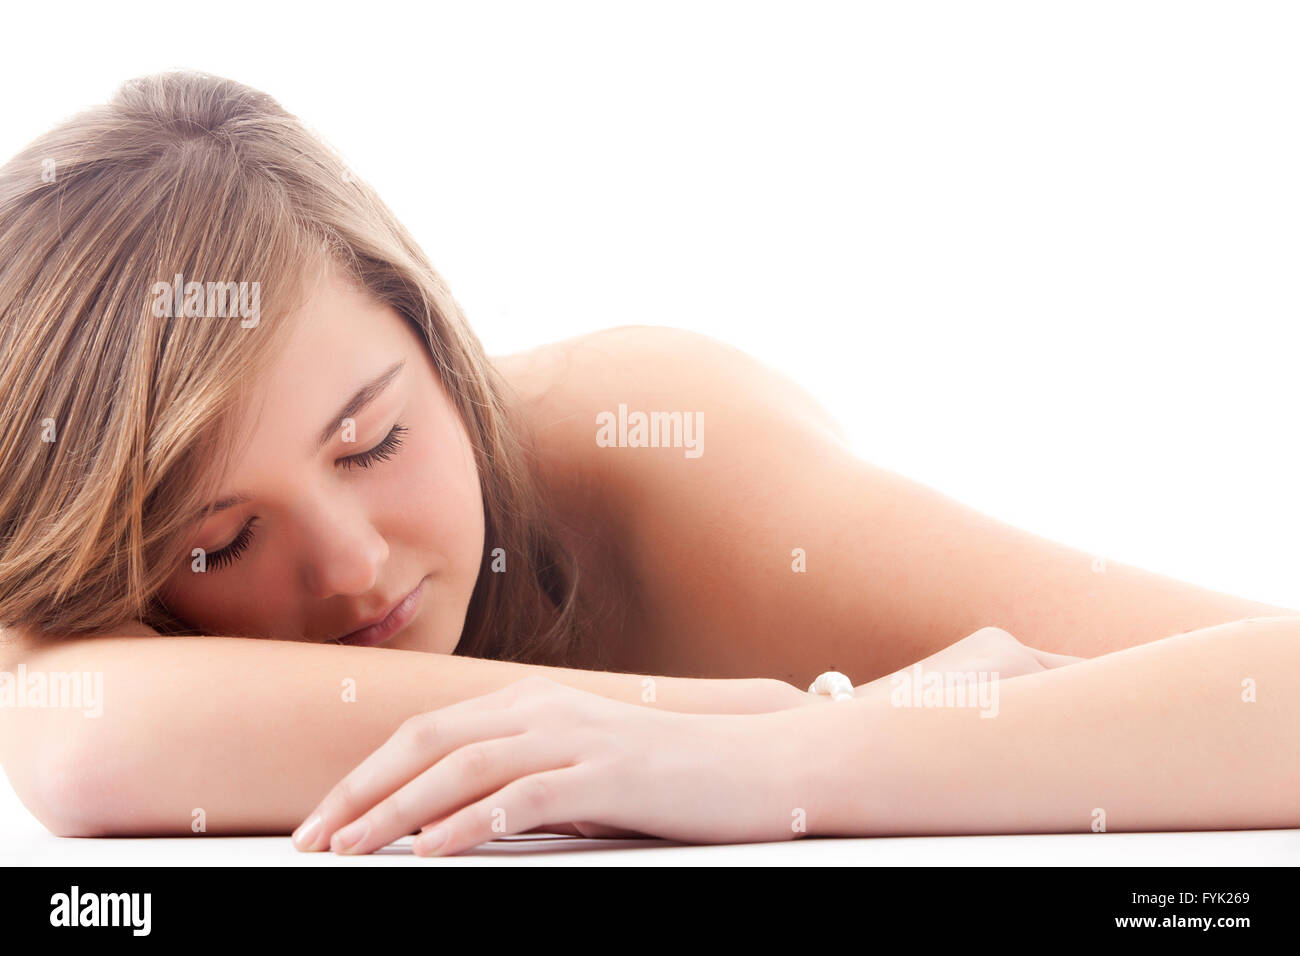 Teenager with closed eyes Stock Photo